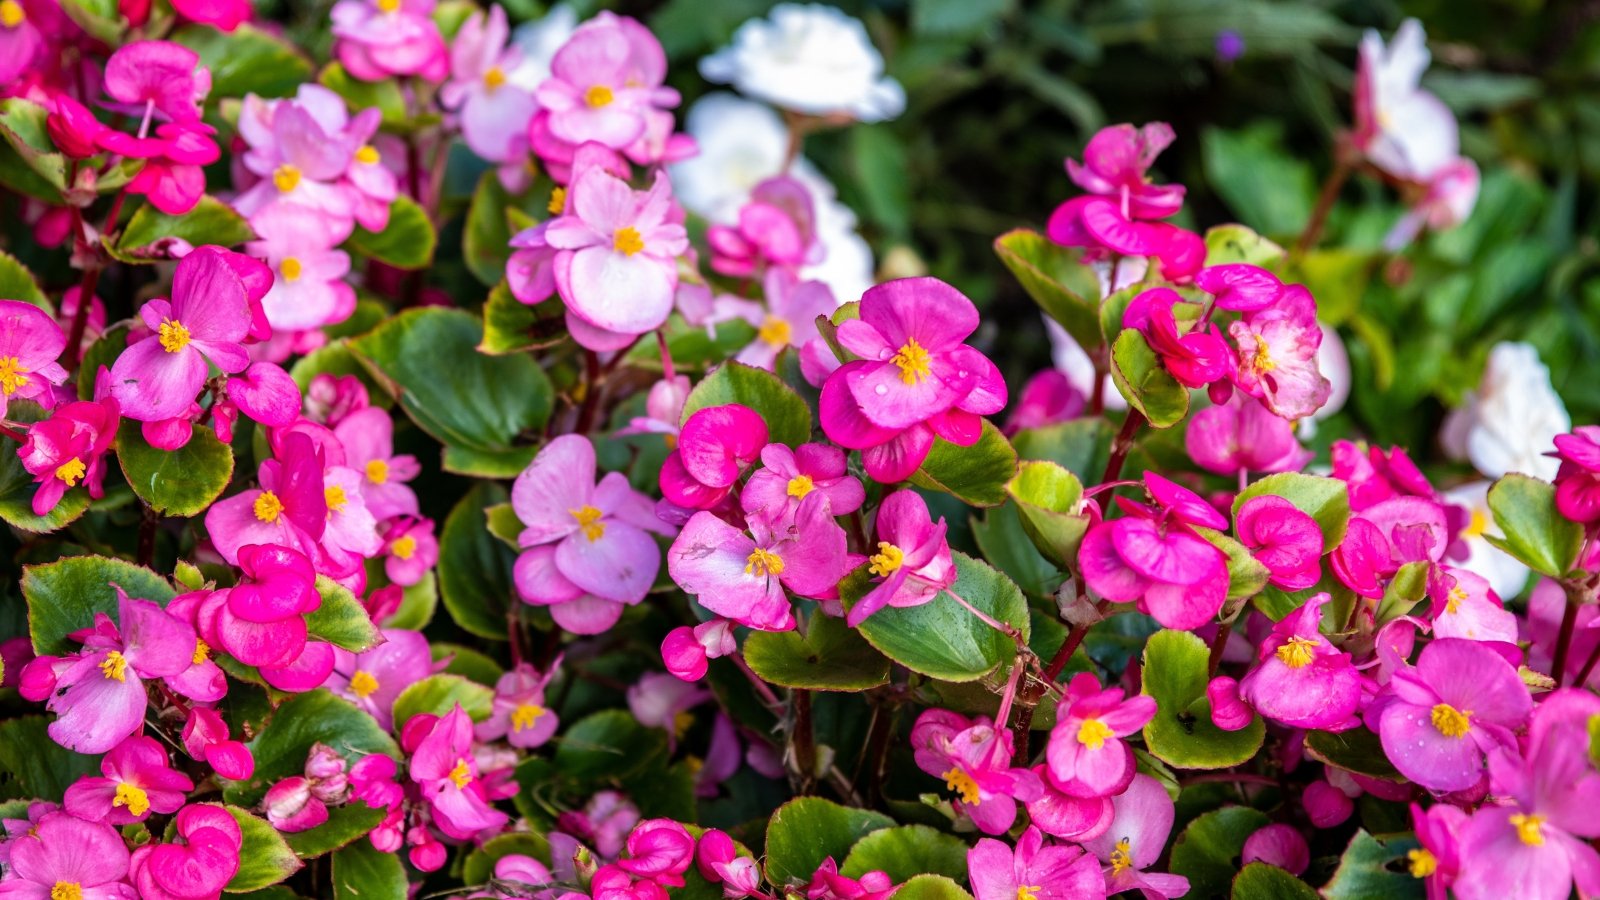 Begonias boast succulent stems and round, jagged-edged leaves, accompanied by clusters of delicate, pink and white flowers.